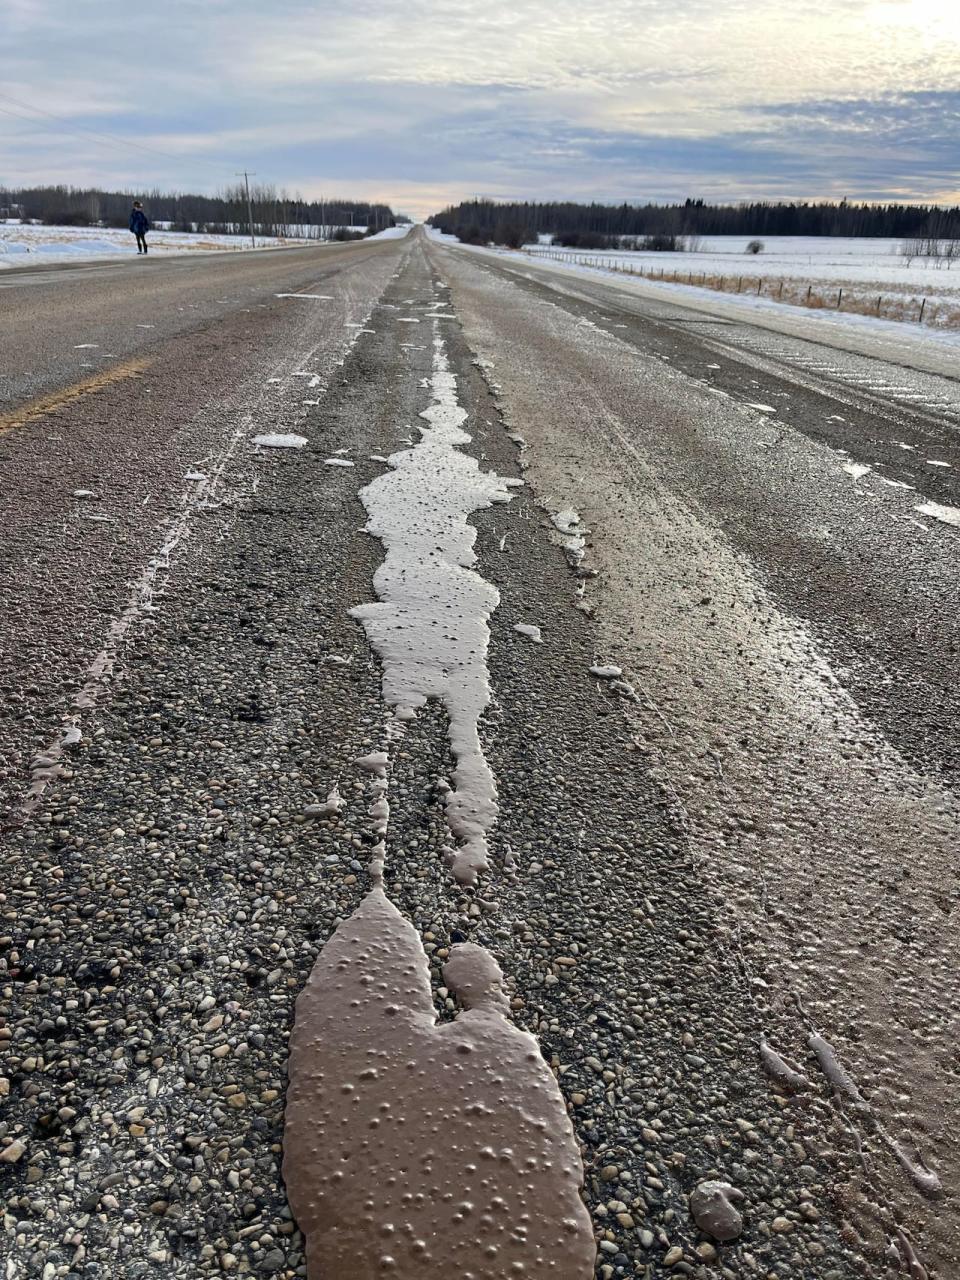 Cleanup continues along a stretch of highway in central Alberta after a spill Thursday.